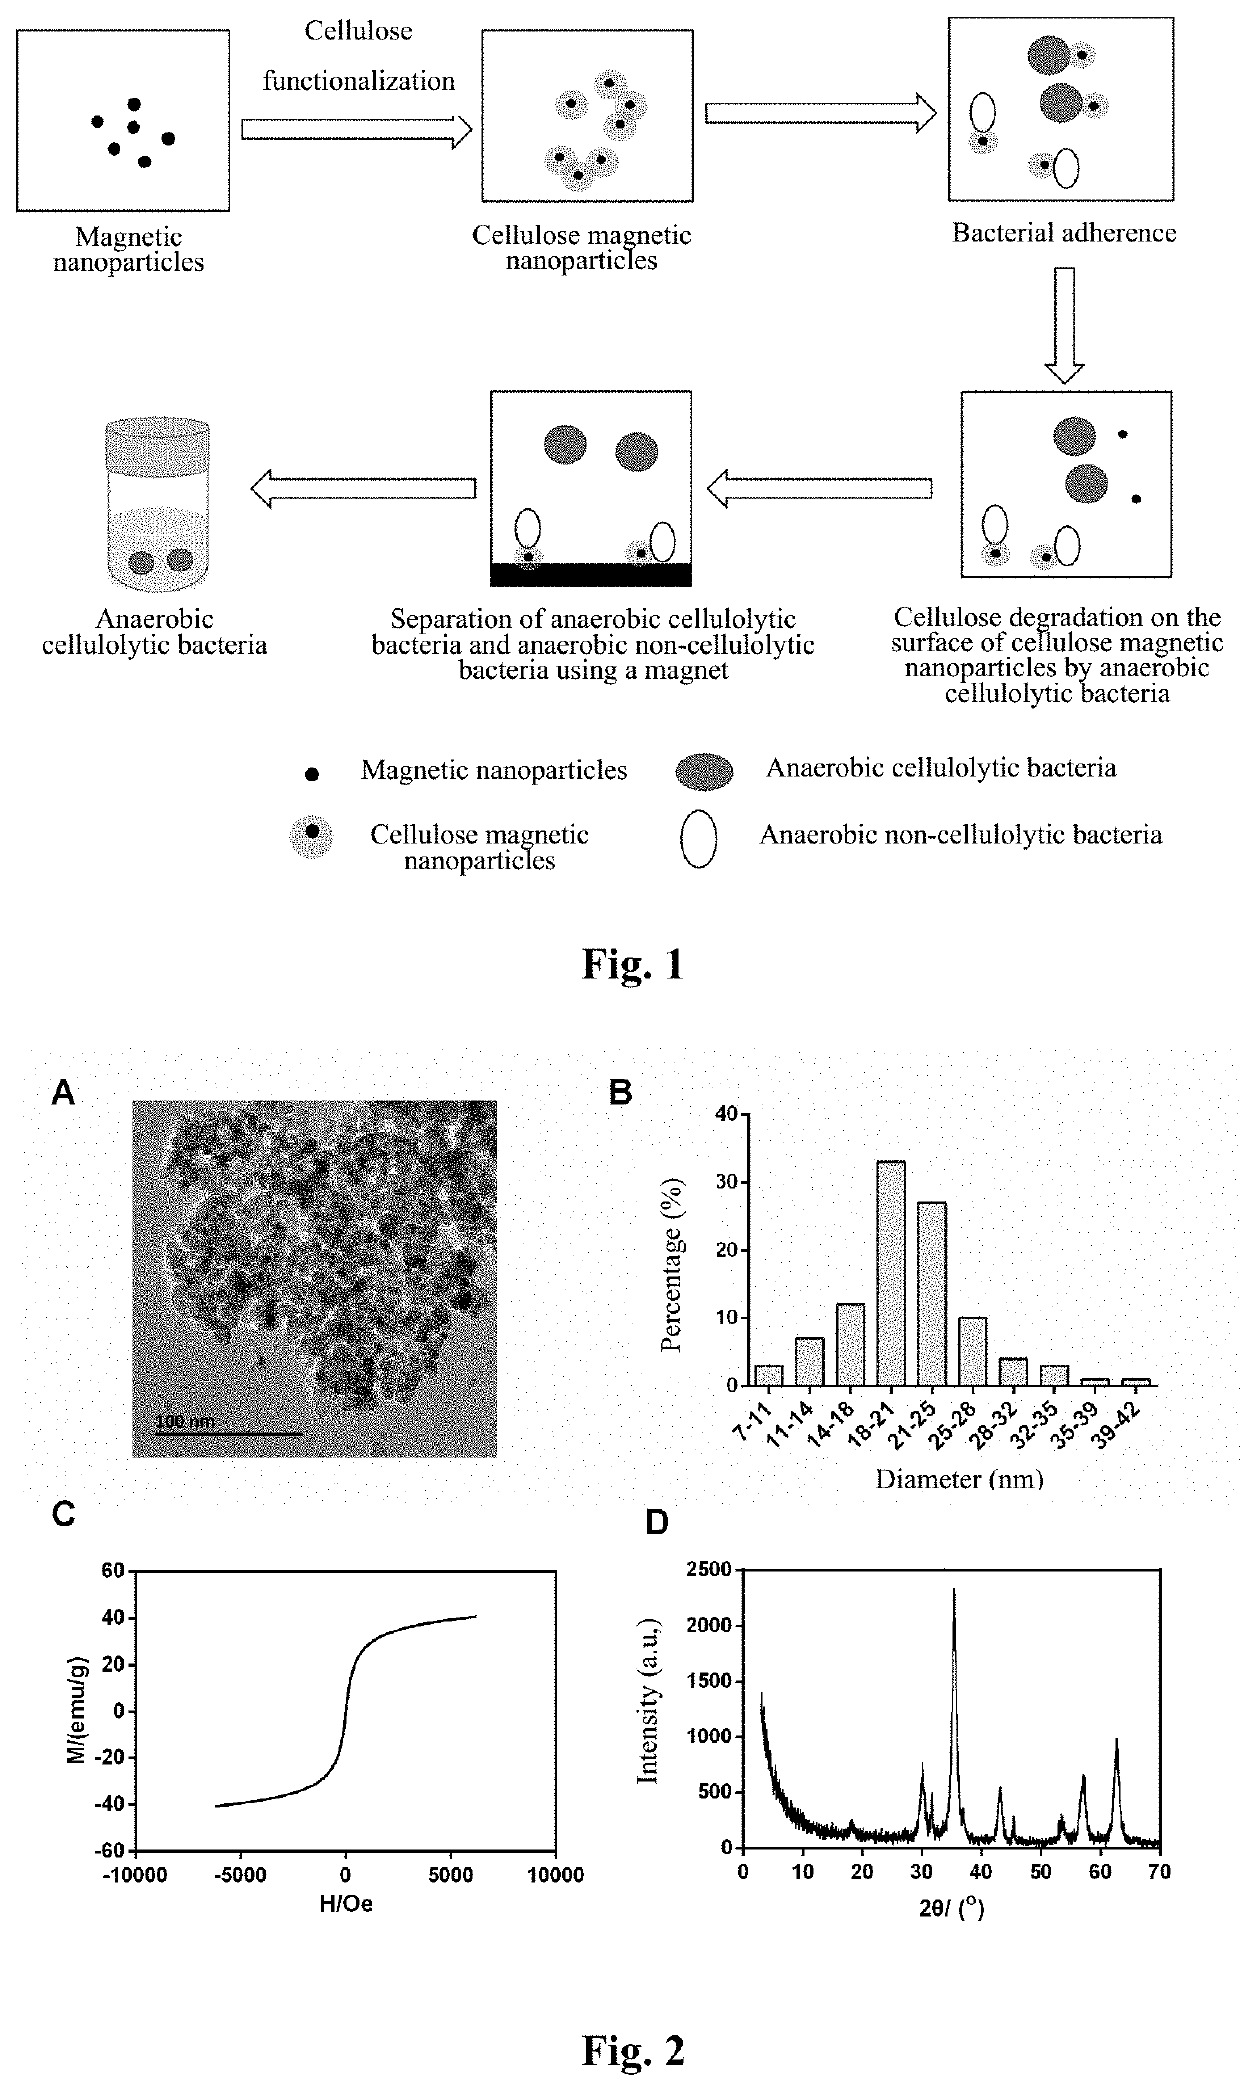 Method for enriching and separating anaerobic fiber-degrading bacterium on the basis of cellulosic magnetic nanoparticles